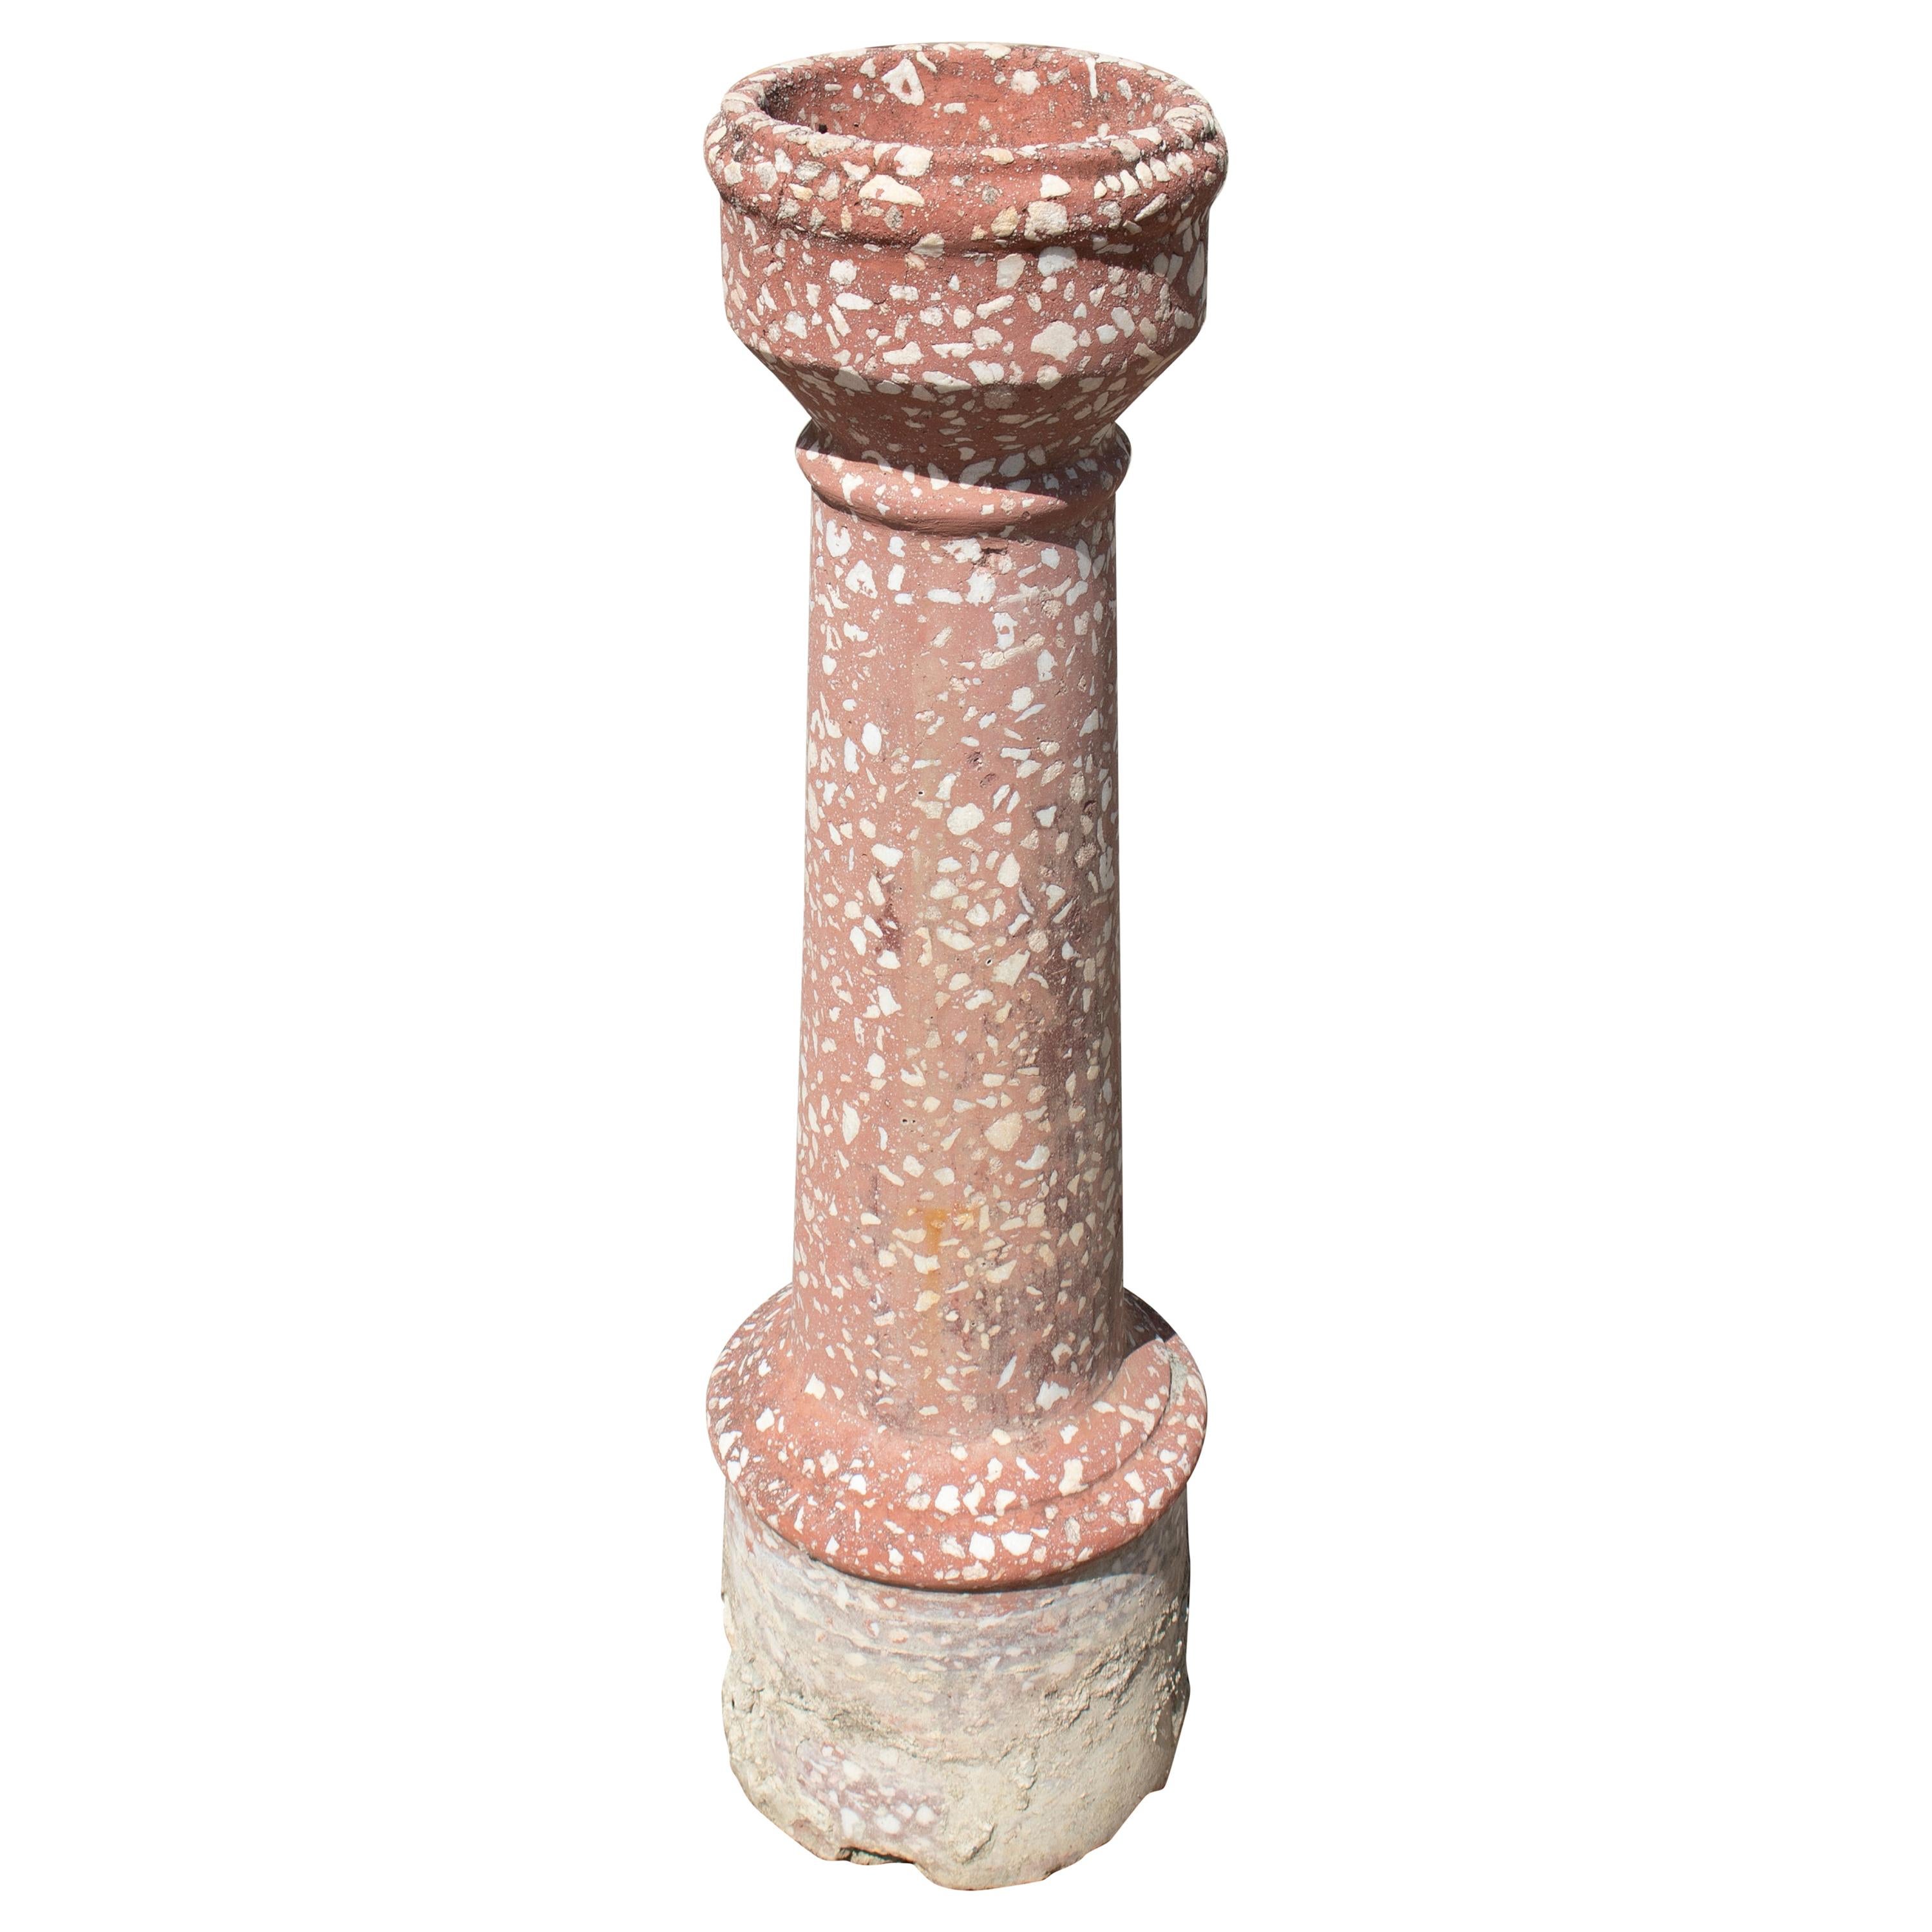 1930s Spanish Reconstituted Stone Red Drinking Fountain